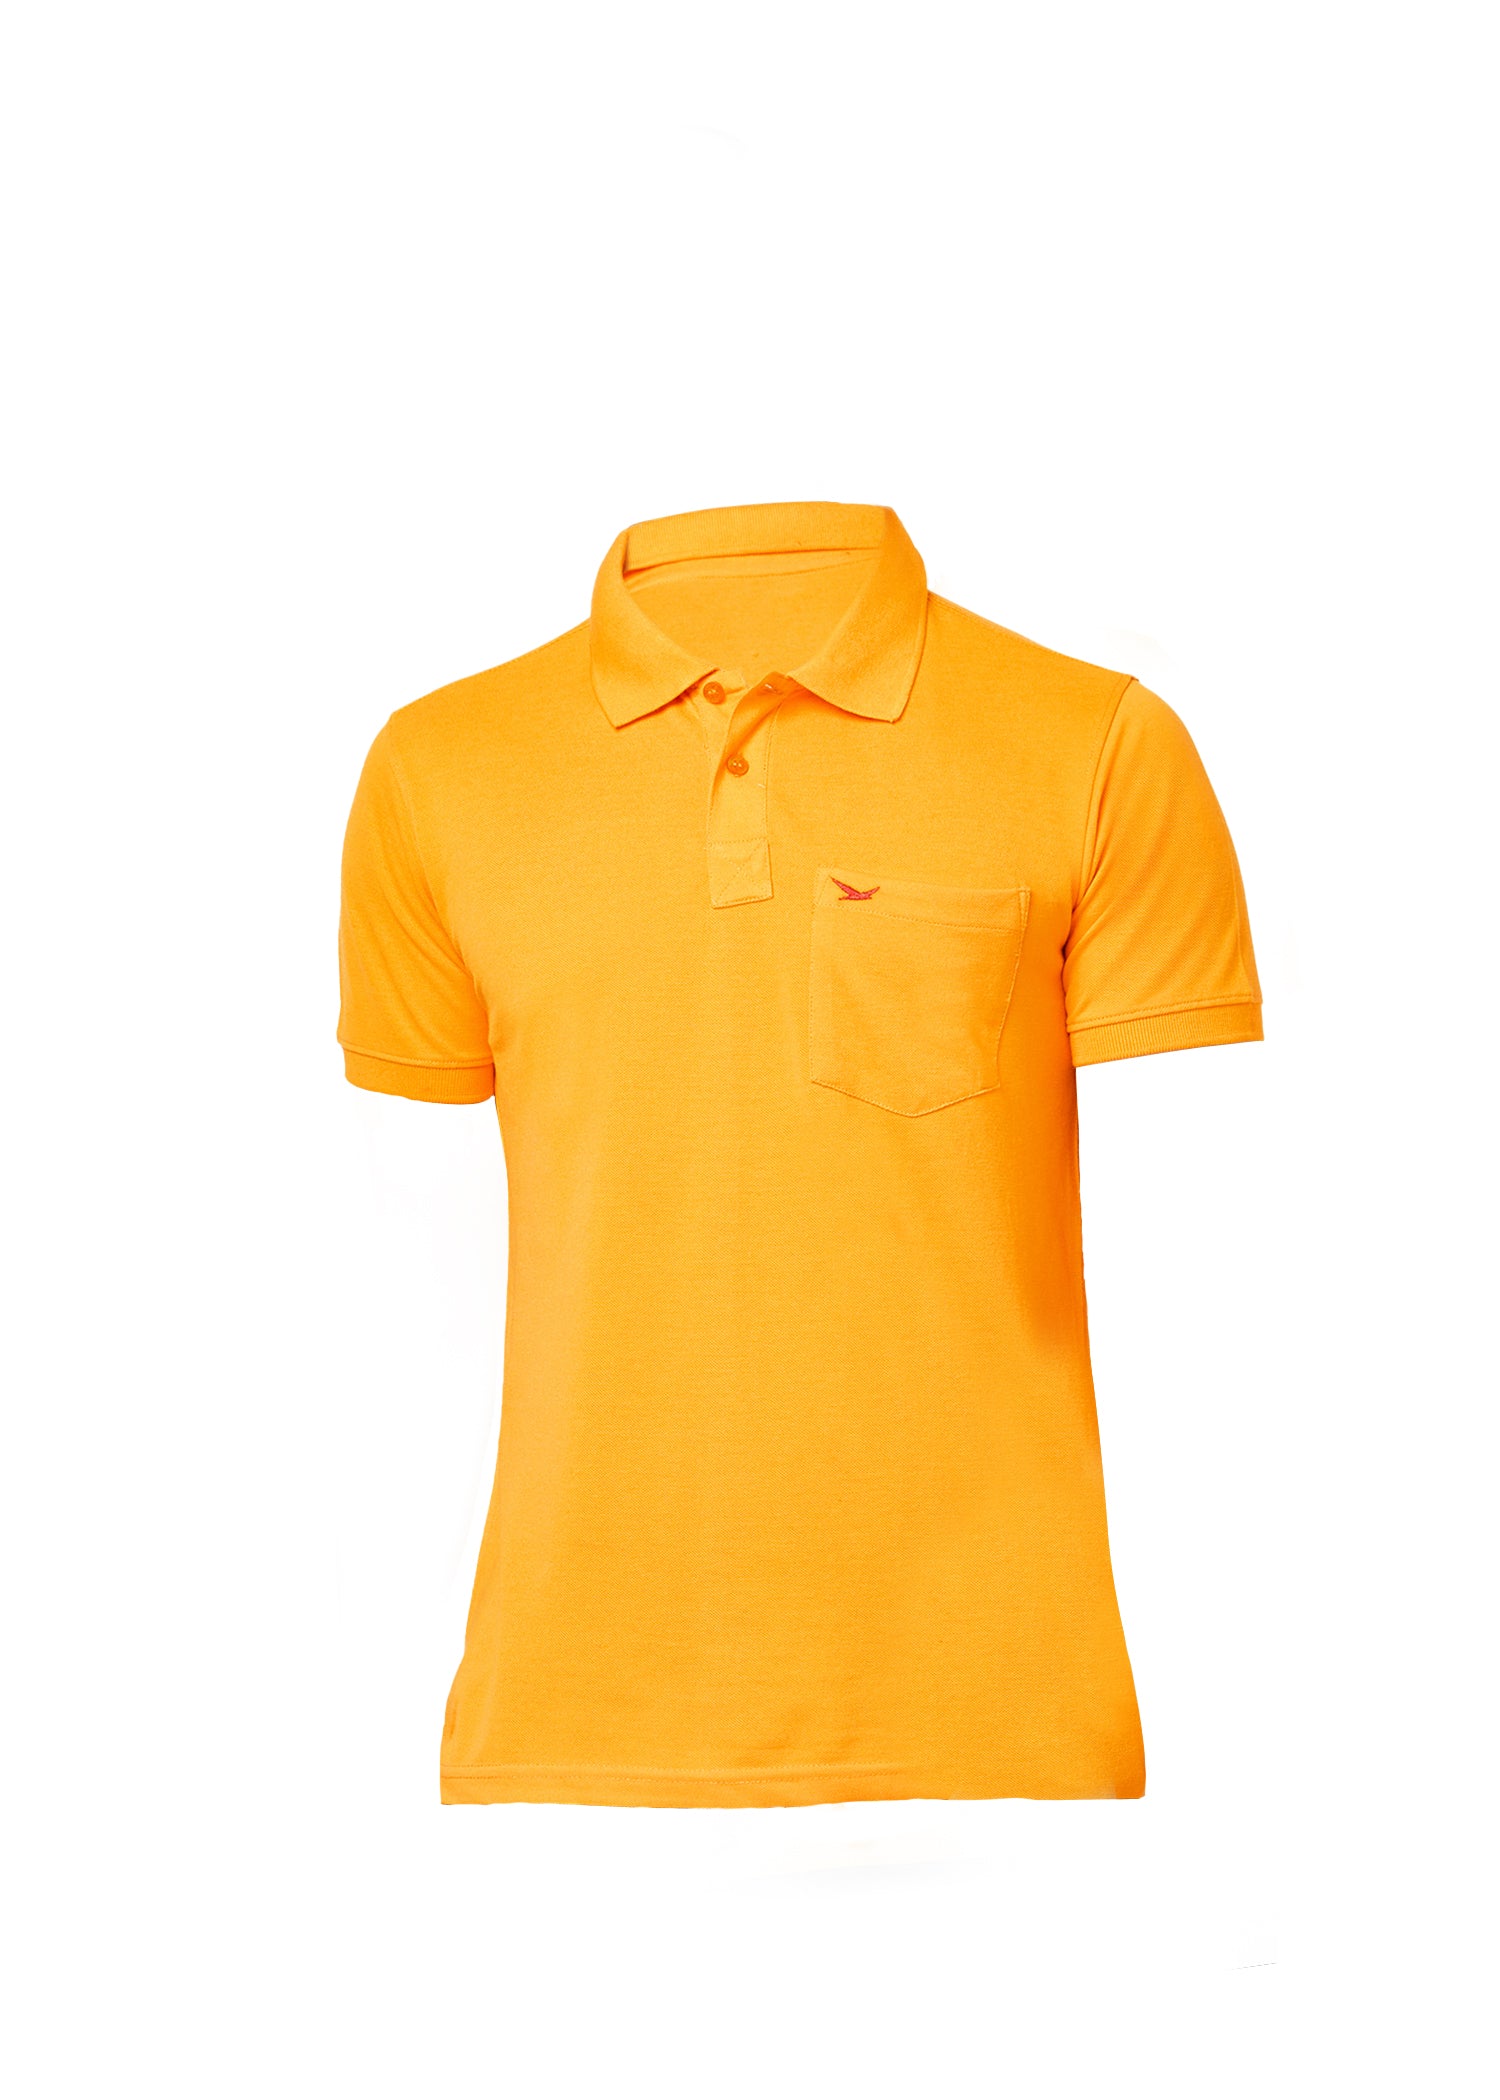 Hiflyers Men'S Solid Regular Fit Polo T-Shirt With Pocket -Mustard